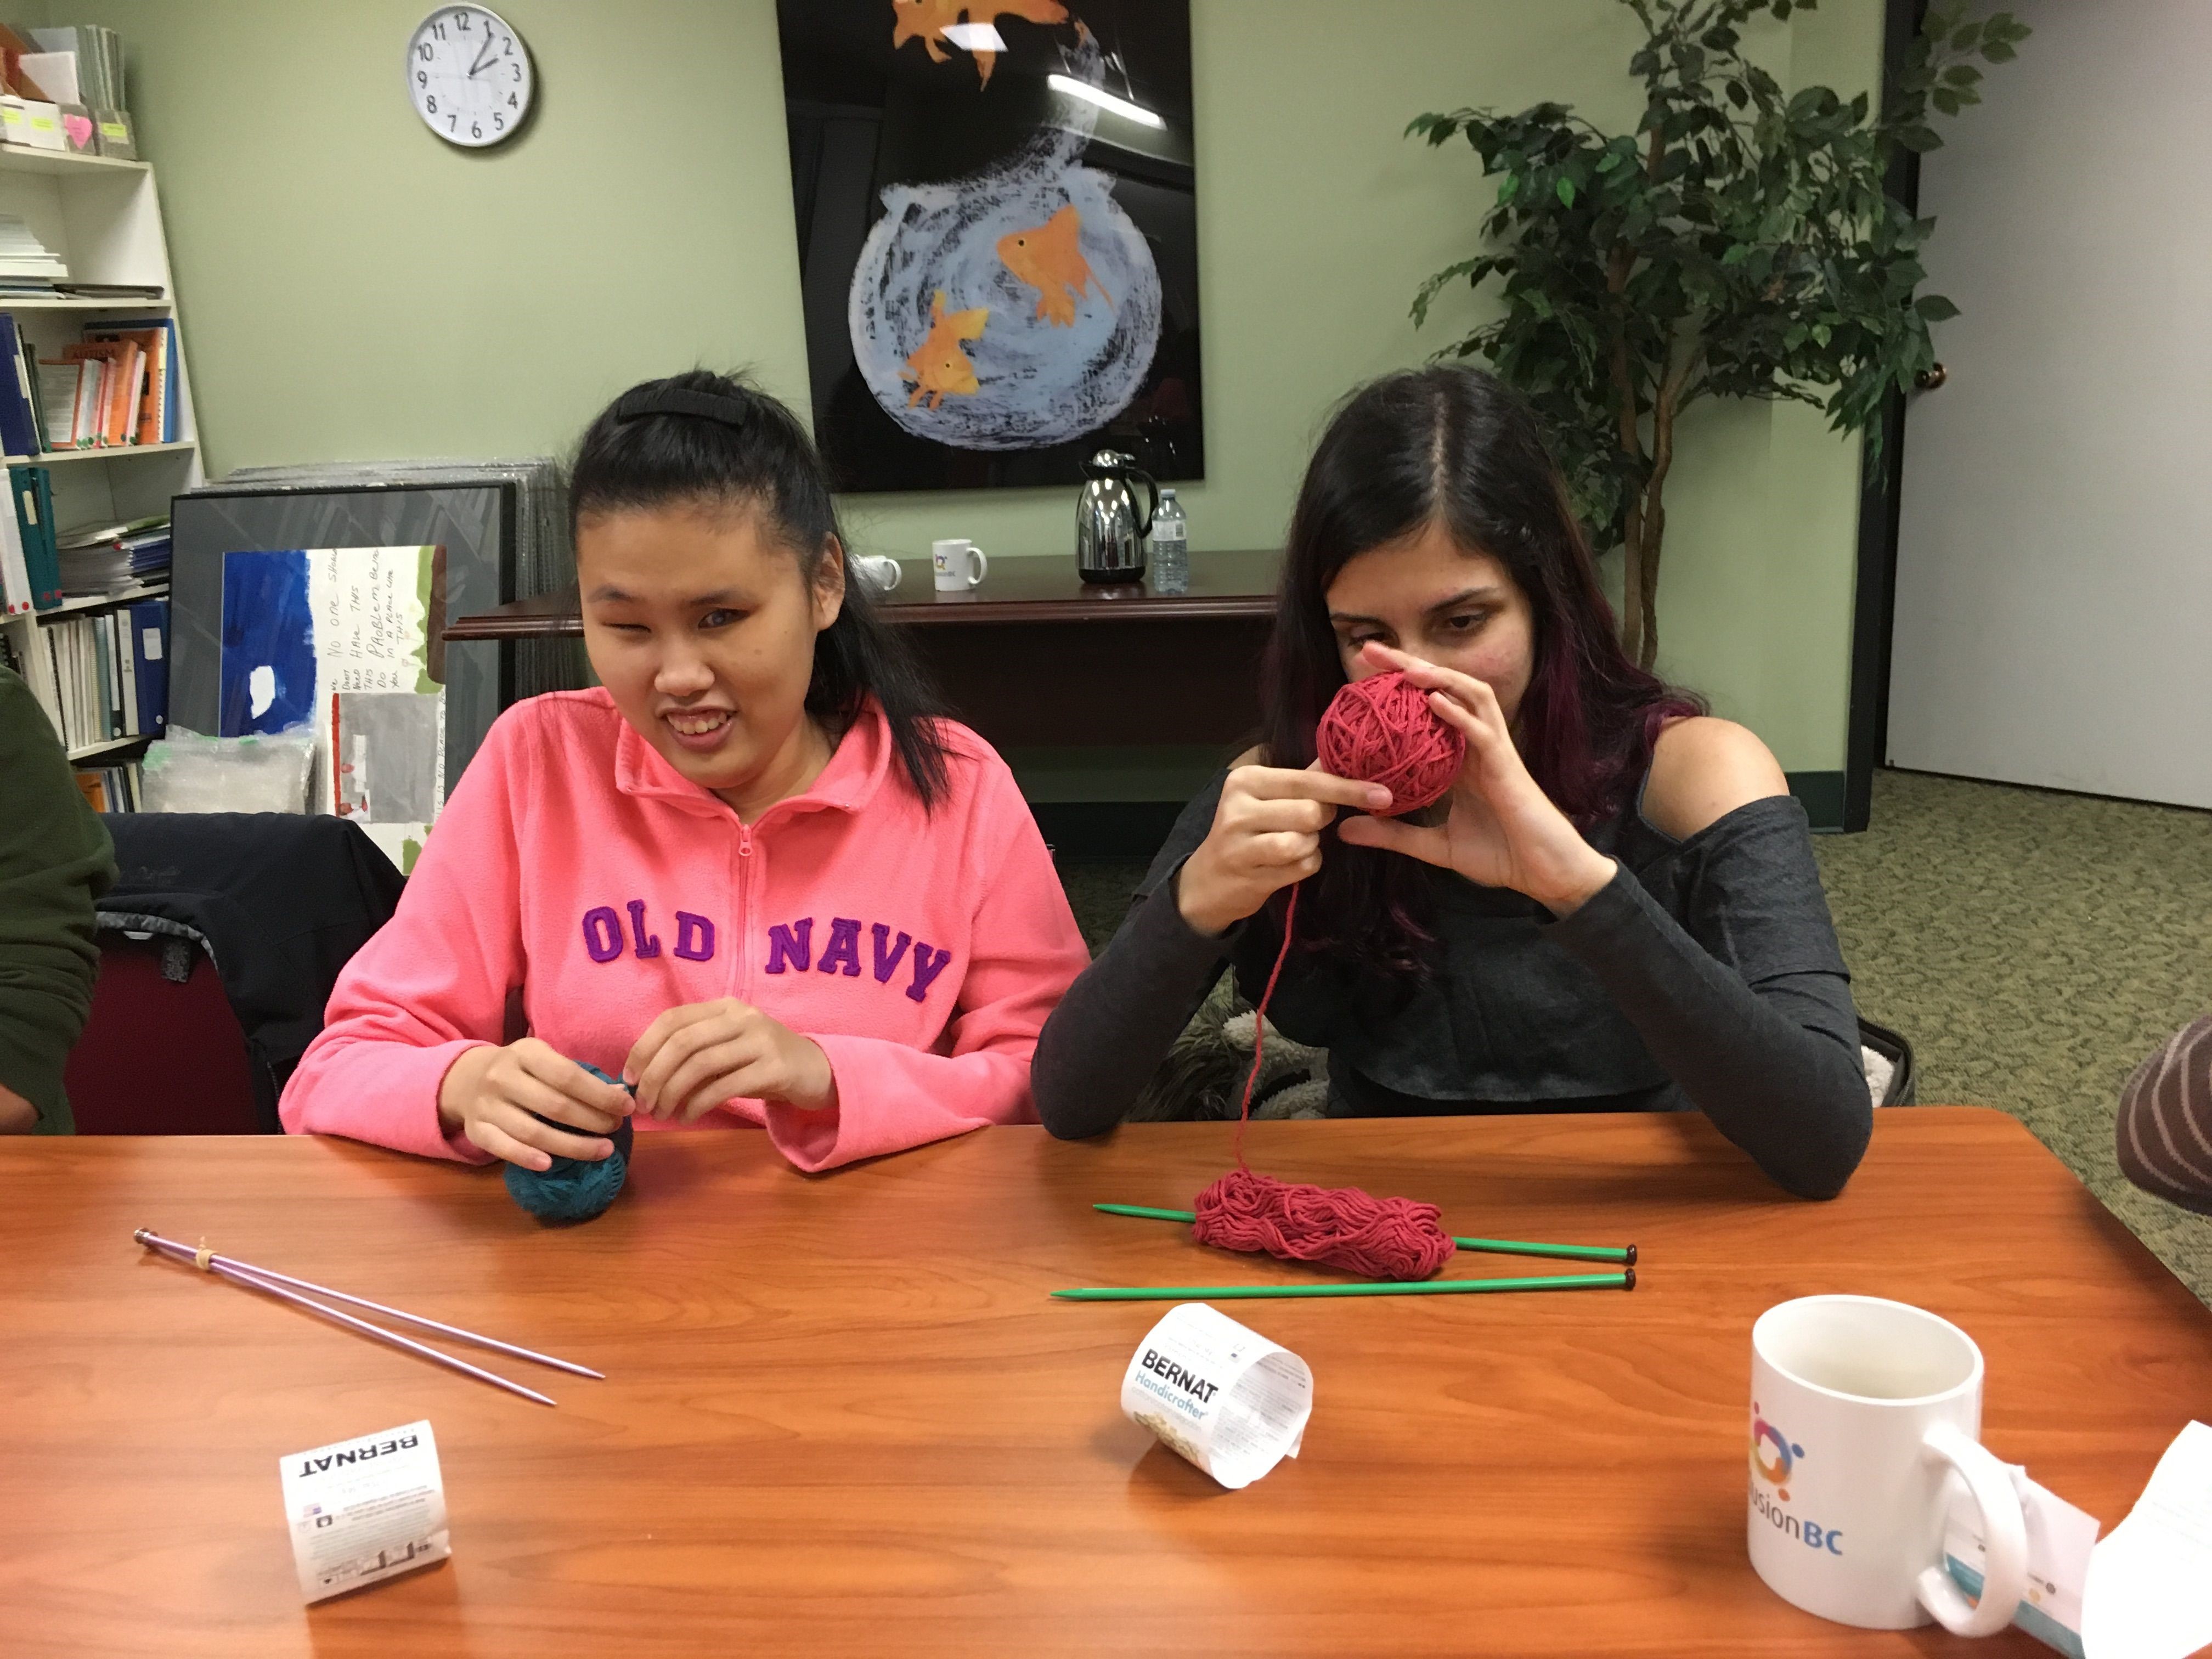 Photo of two visually impaired youth working together on crafting stuffed bunnies.